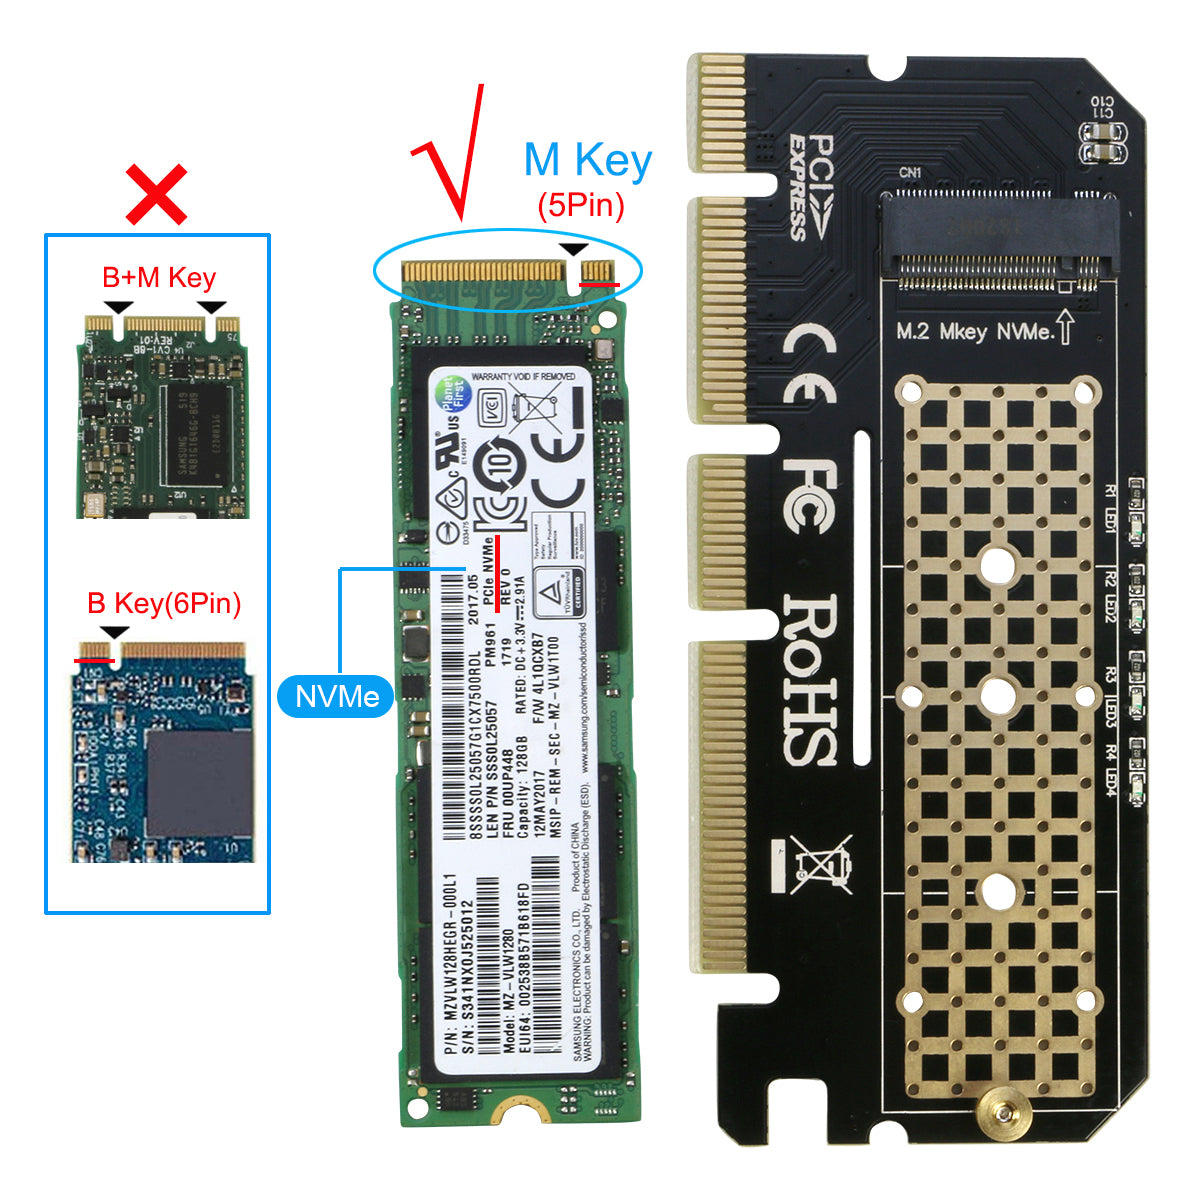 Borgerskab nyt år aften M.2 NVMe SSD to PCI-E 3.0 4x/8x/x16 Adapter Card Converter for M Key P –  RIITOP